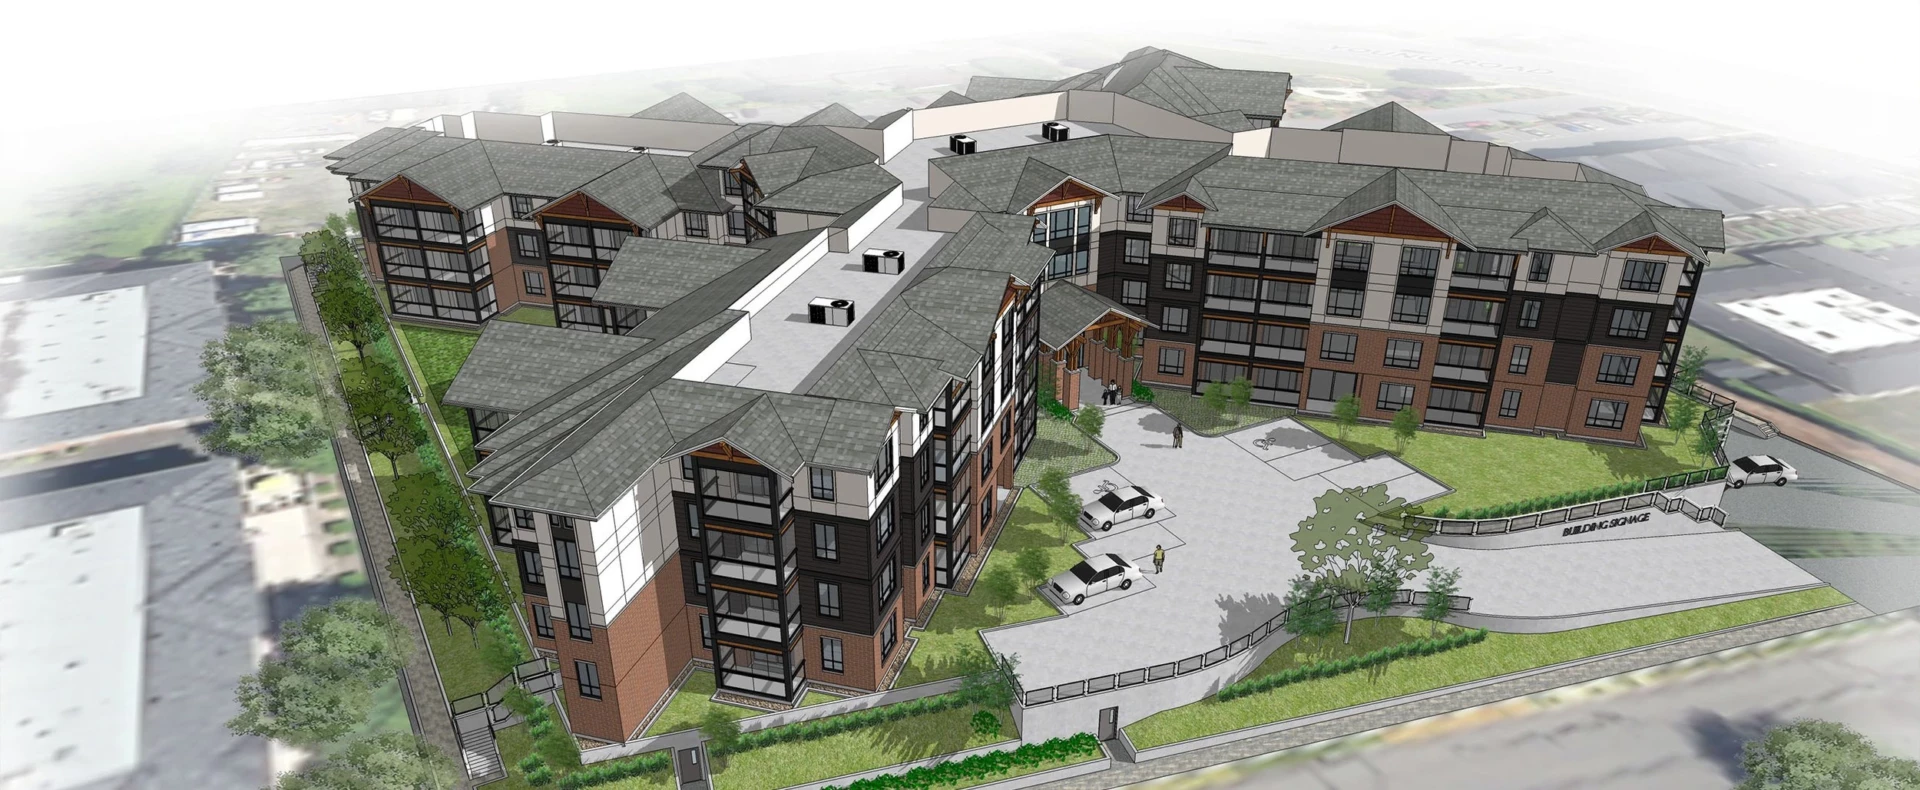 Mountainview Lane by Noort Homes is a Chilliwack residential development with 113 condominiums.